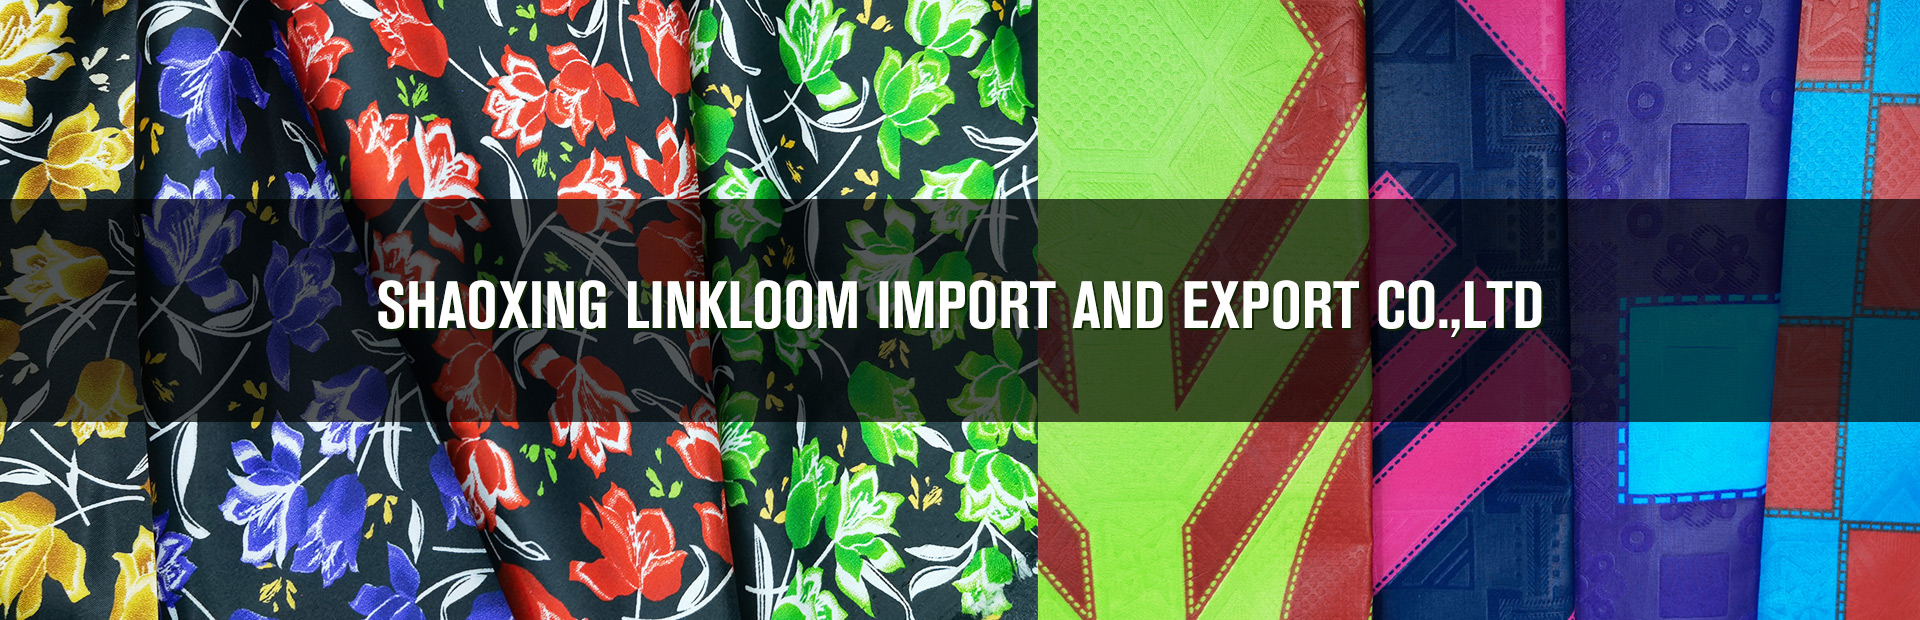 Shaoxing Linkloom Import and Export Co.,ltd.